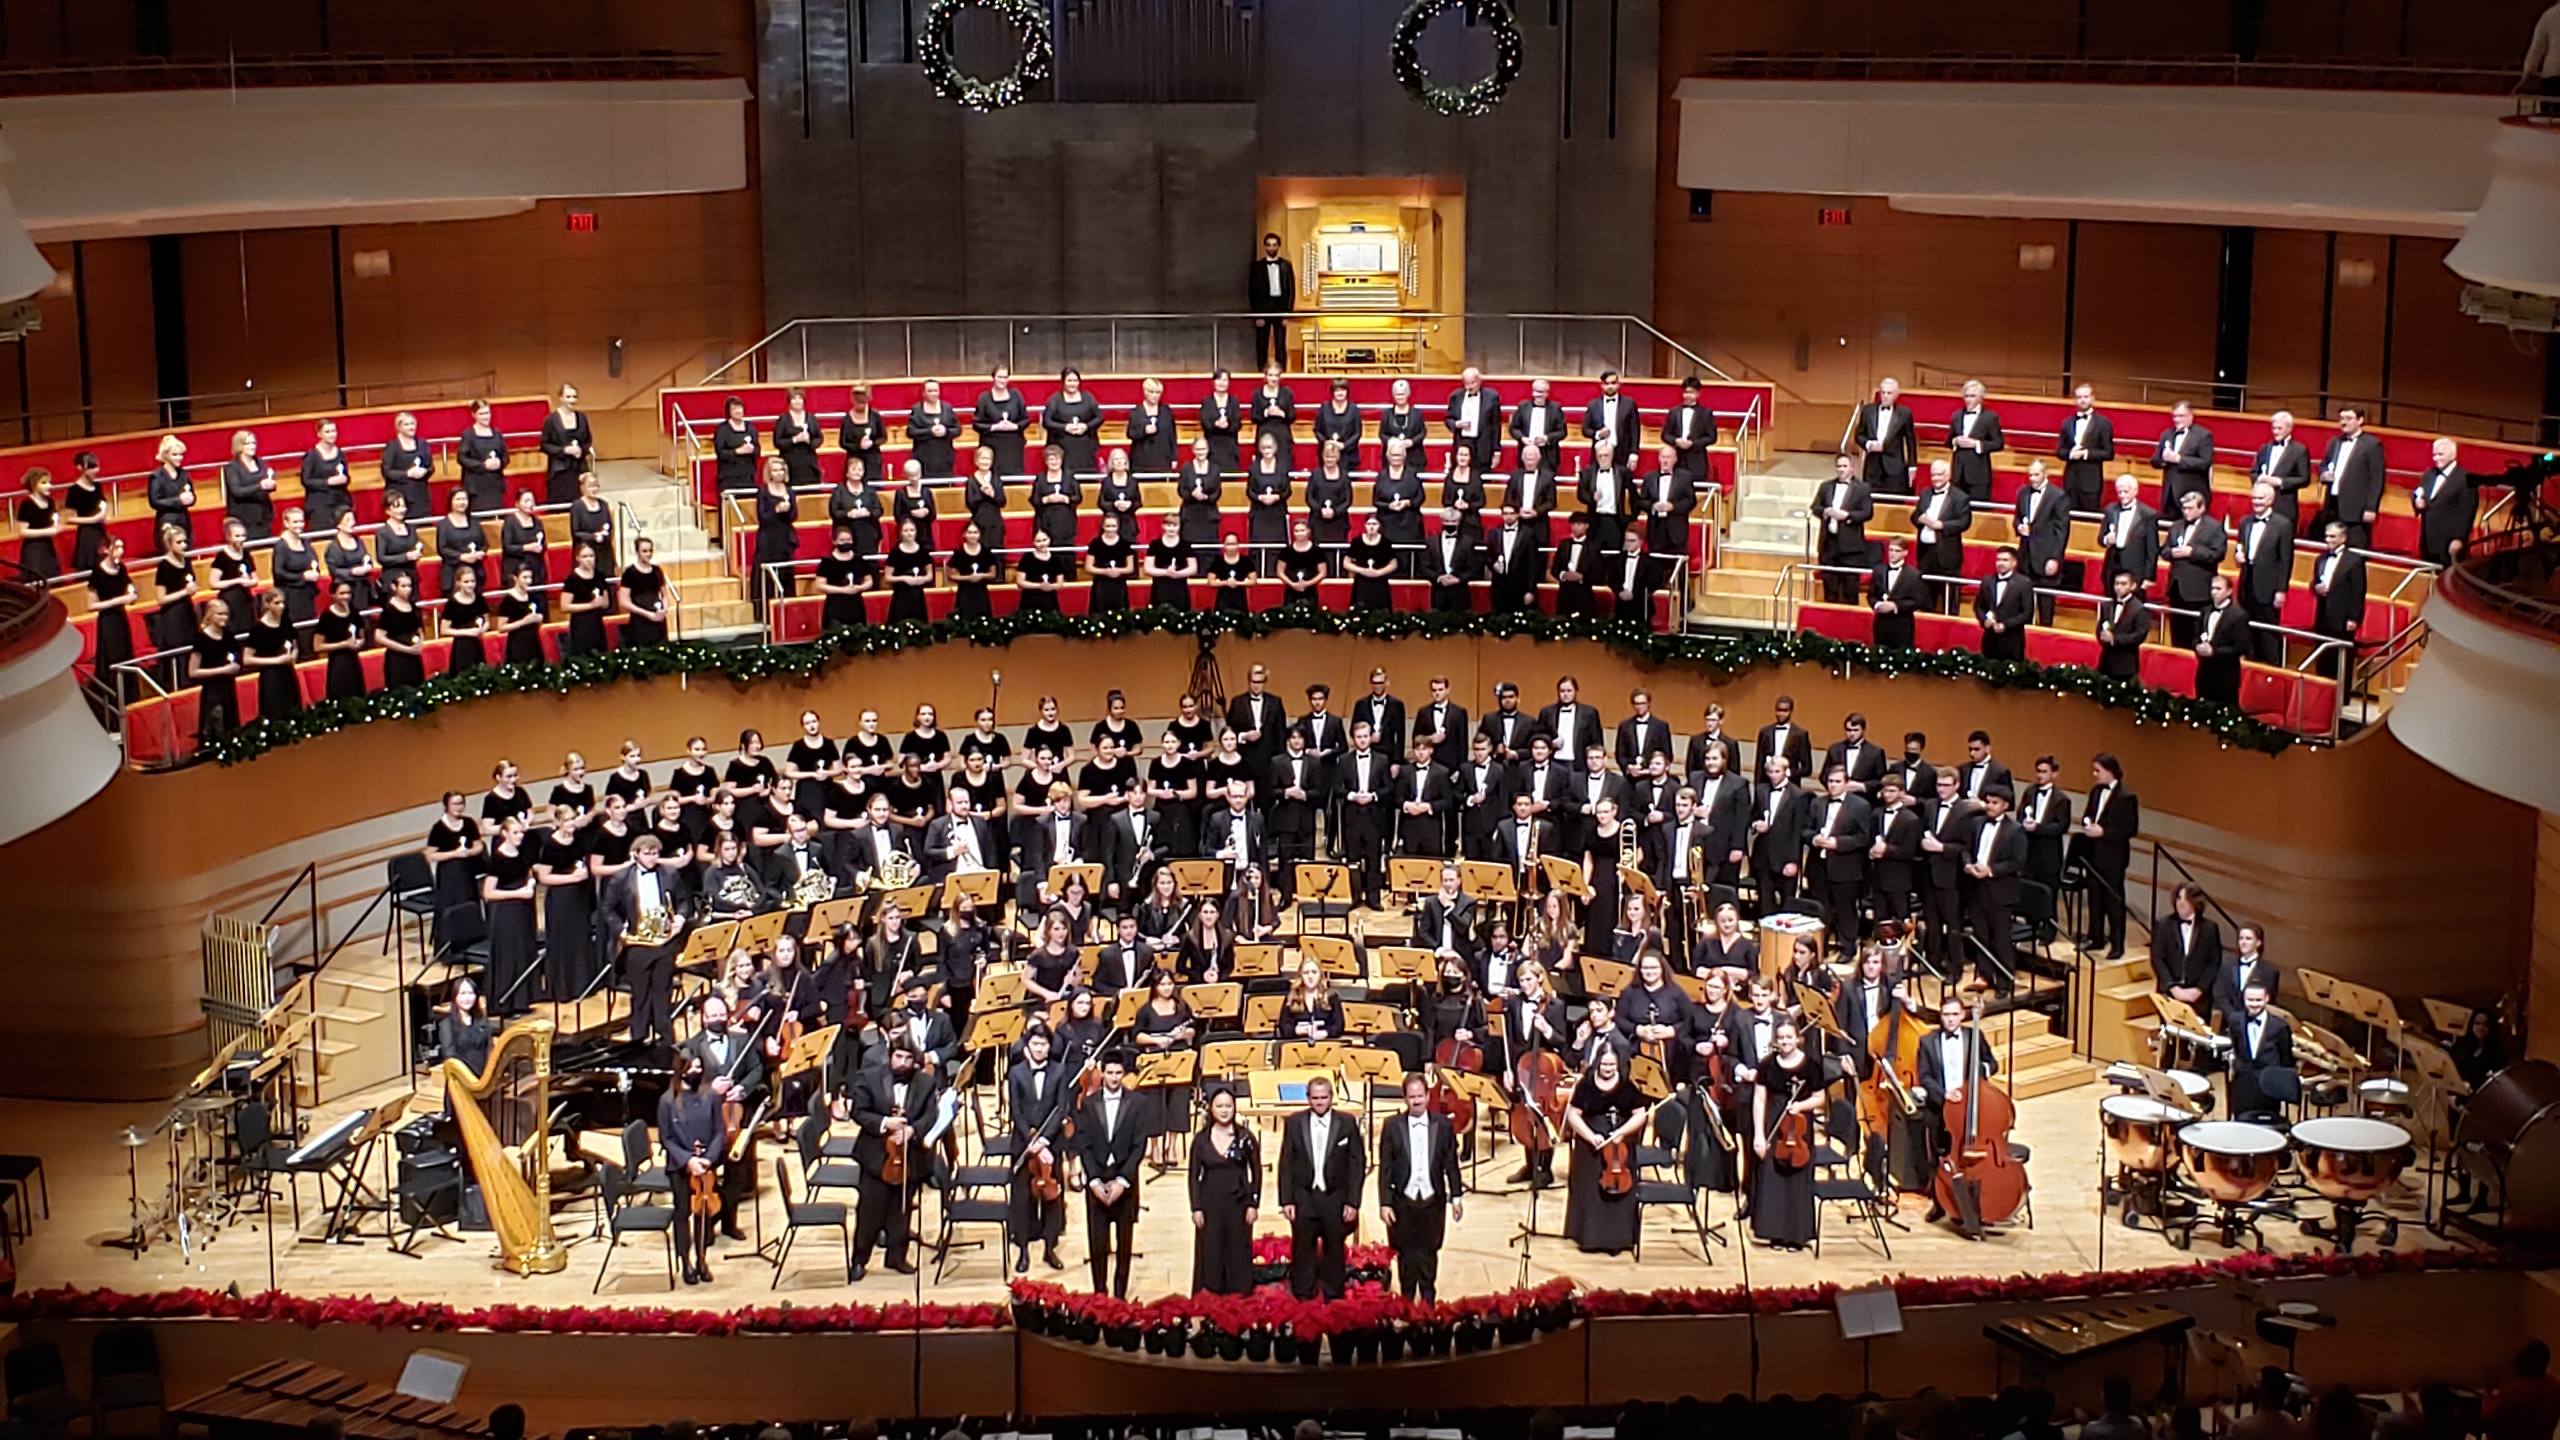 Concordia musicians and vocalists raise the sounds of joy in Segerstrom